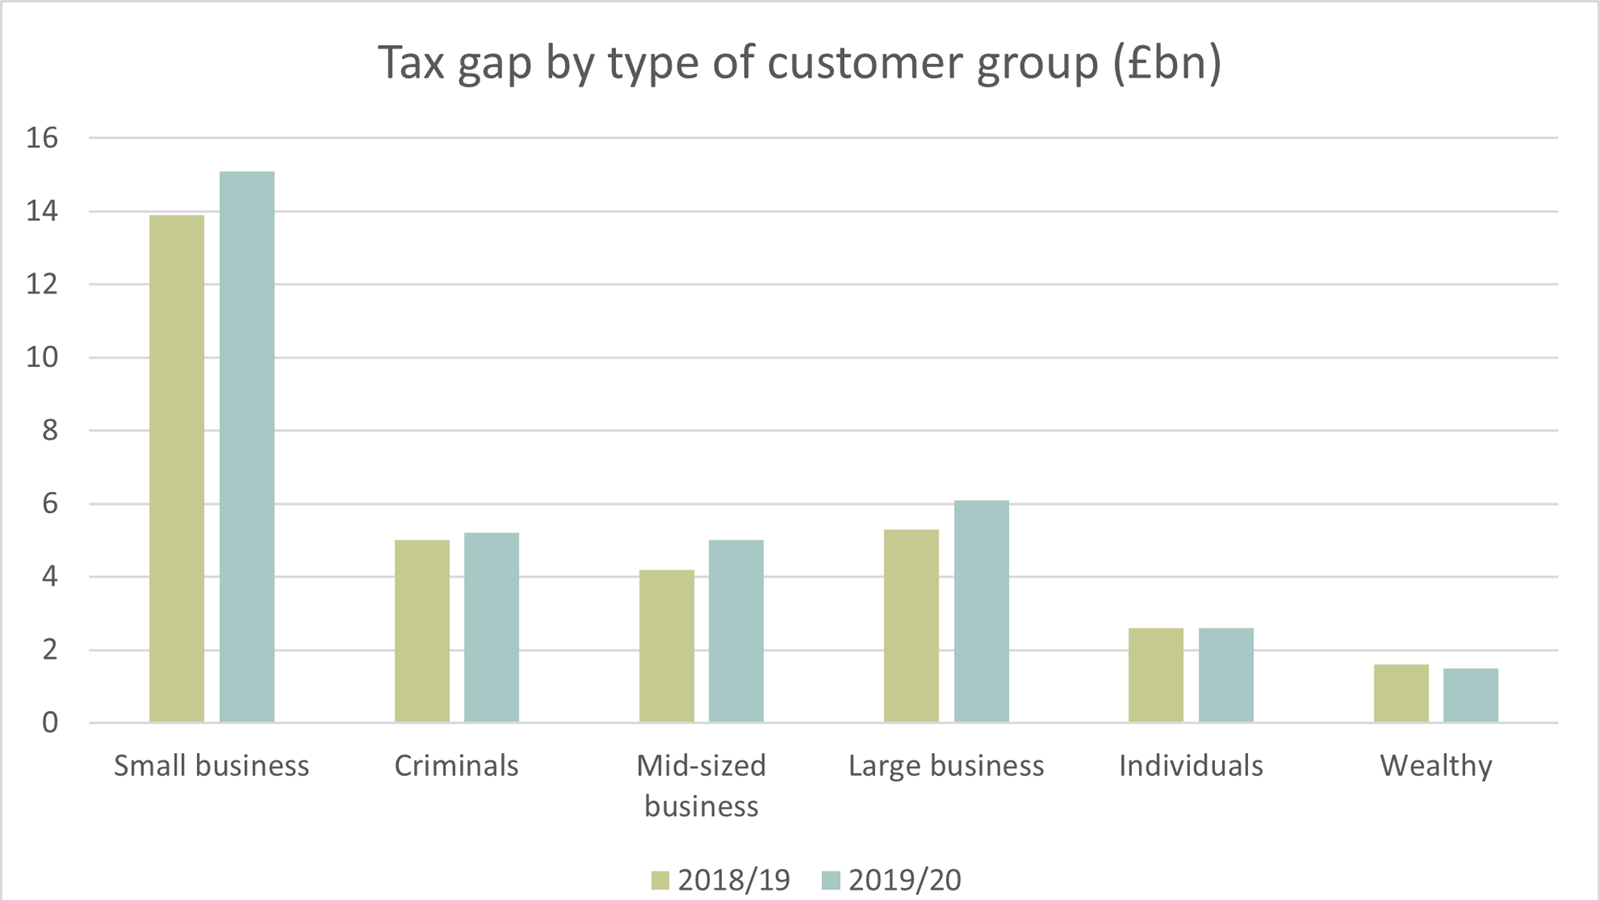 Table showing the tax gap for 2019/20 by type of customer group according to HMRC data.